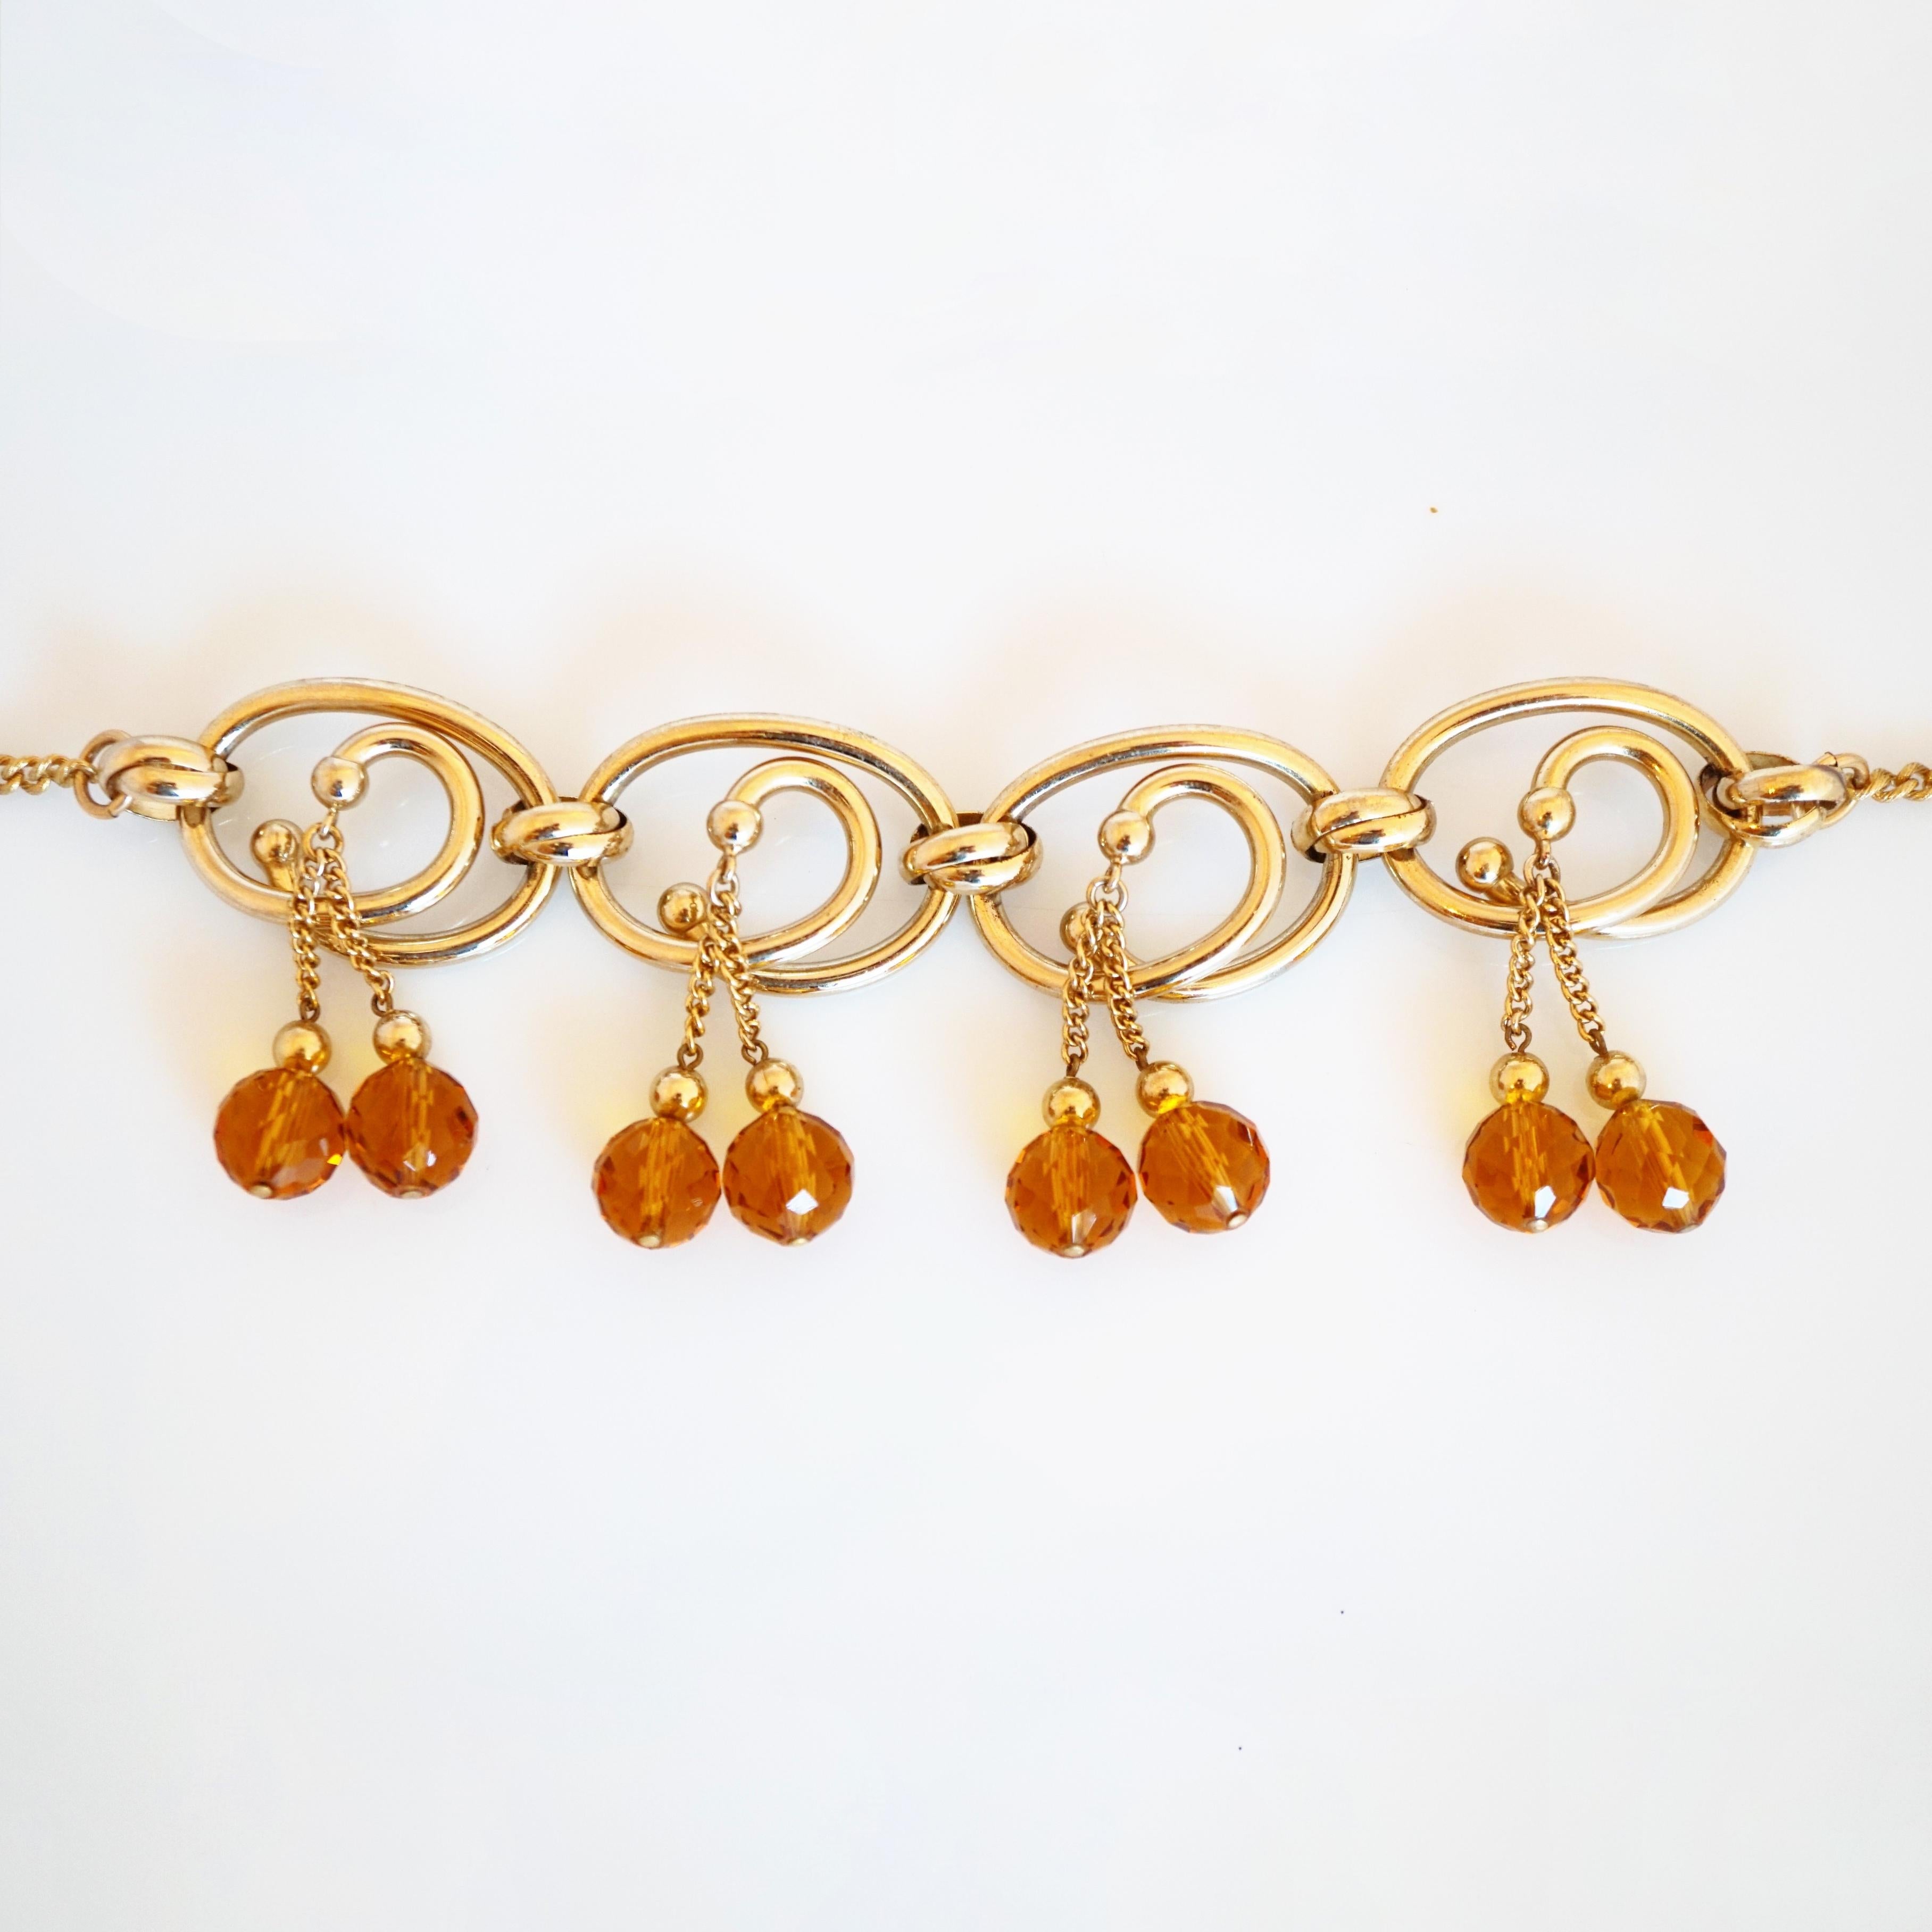 Modern Gilded Swirl Link Choker Necklace With Amber Bead Dangles By Napier, 1950s For Sale